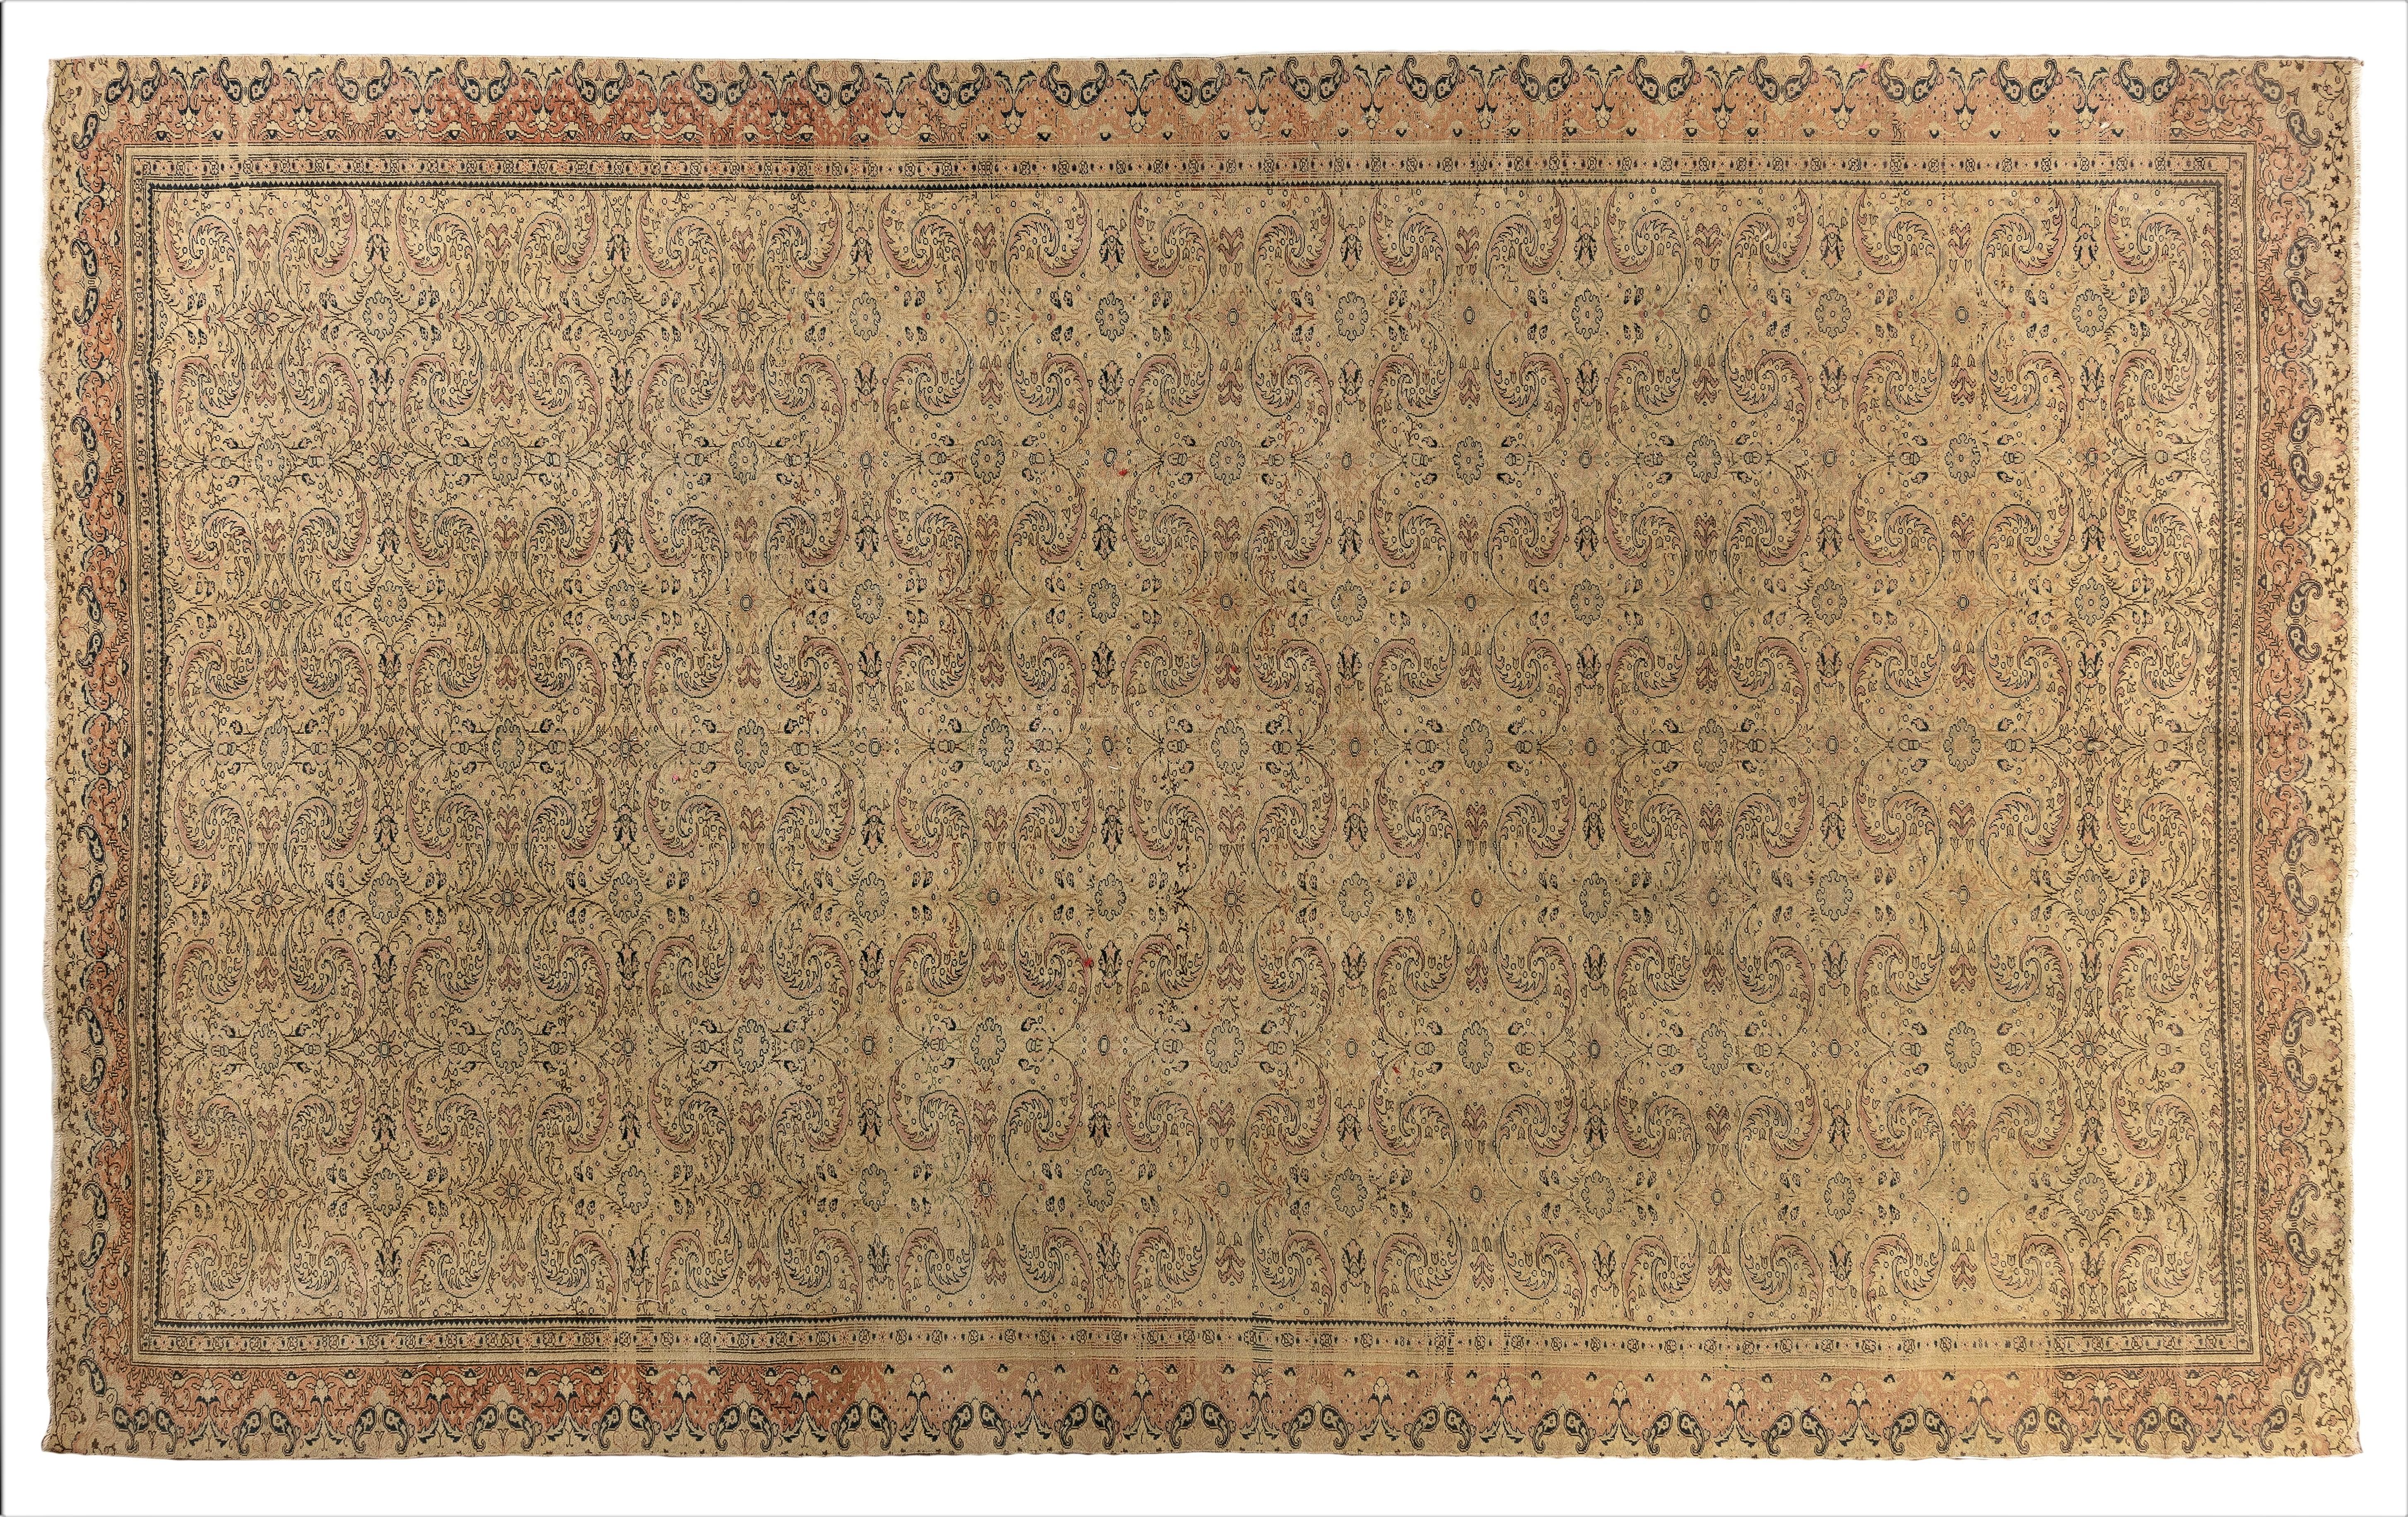 Hand-Woven 10x13.7 Ft Very Fine Vintage Turkish Sivas Rug, Wool Carpet, Floor Covering For Sale